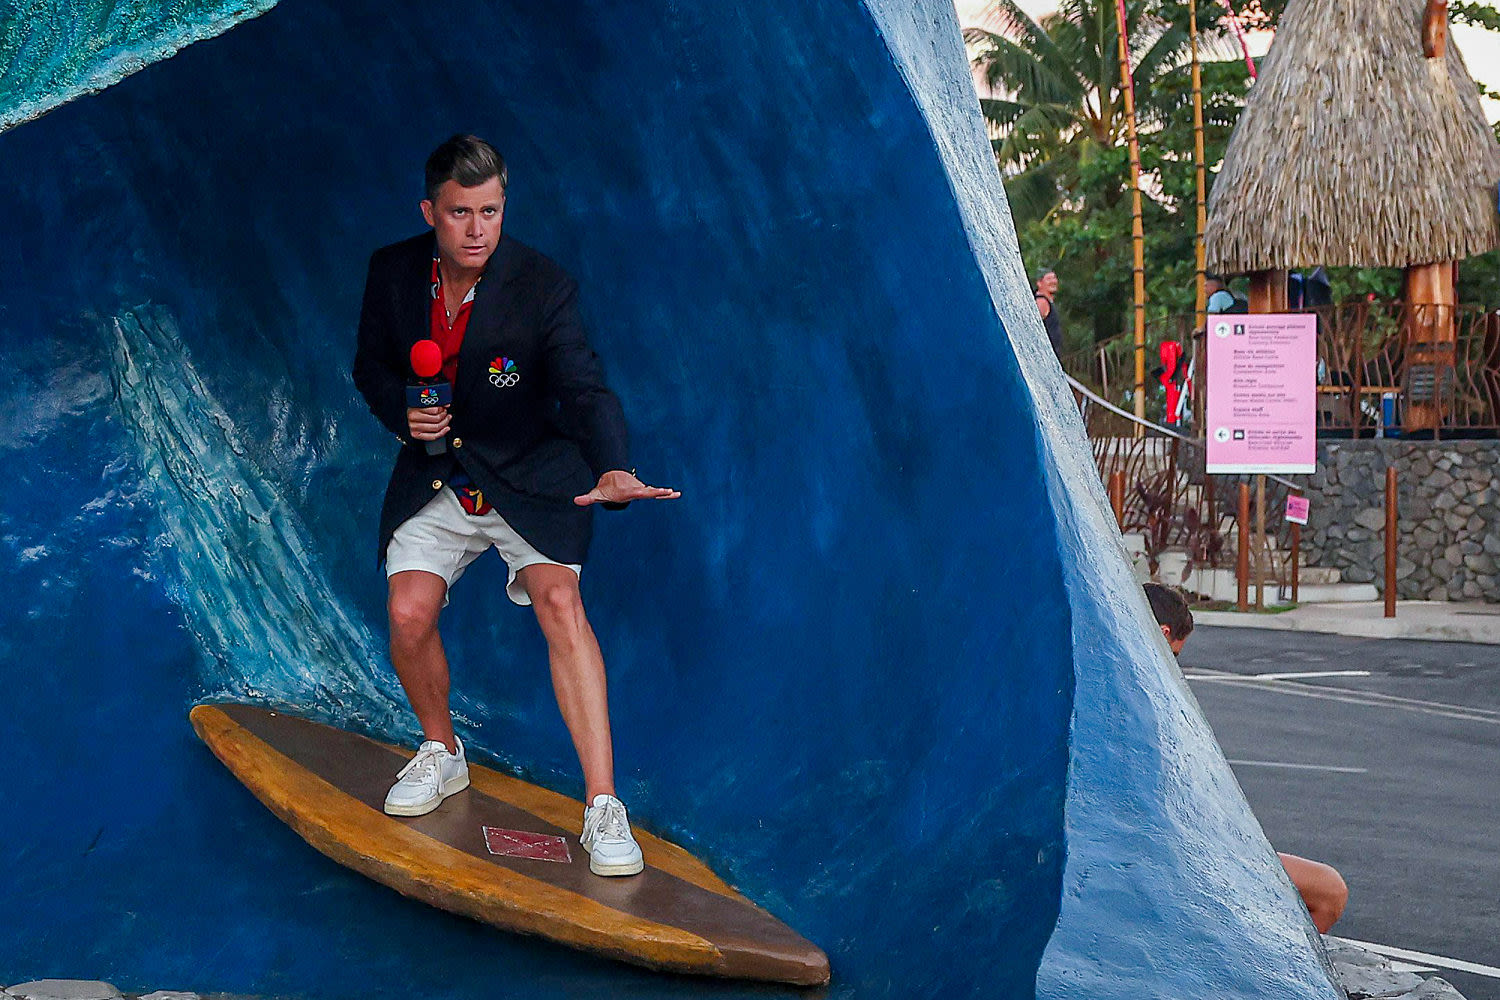 Colin Jost injures foot while covering surfing at Olympics. Here's how it happened.